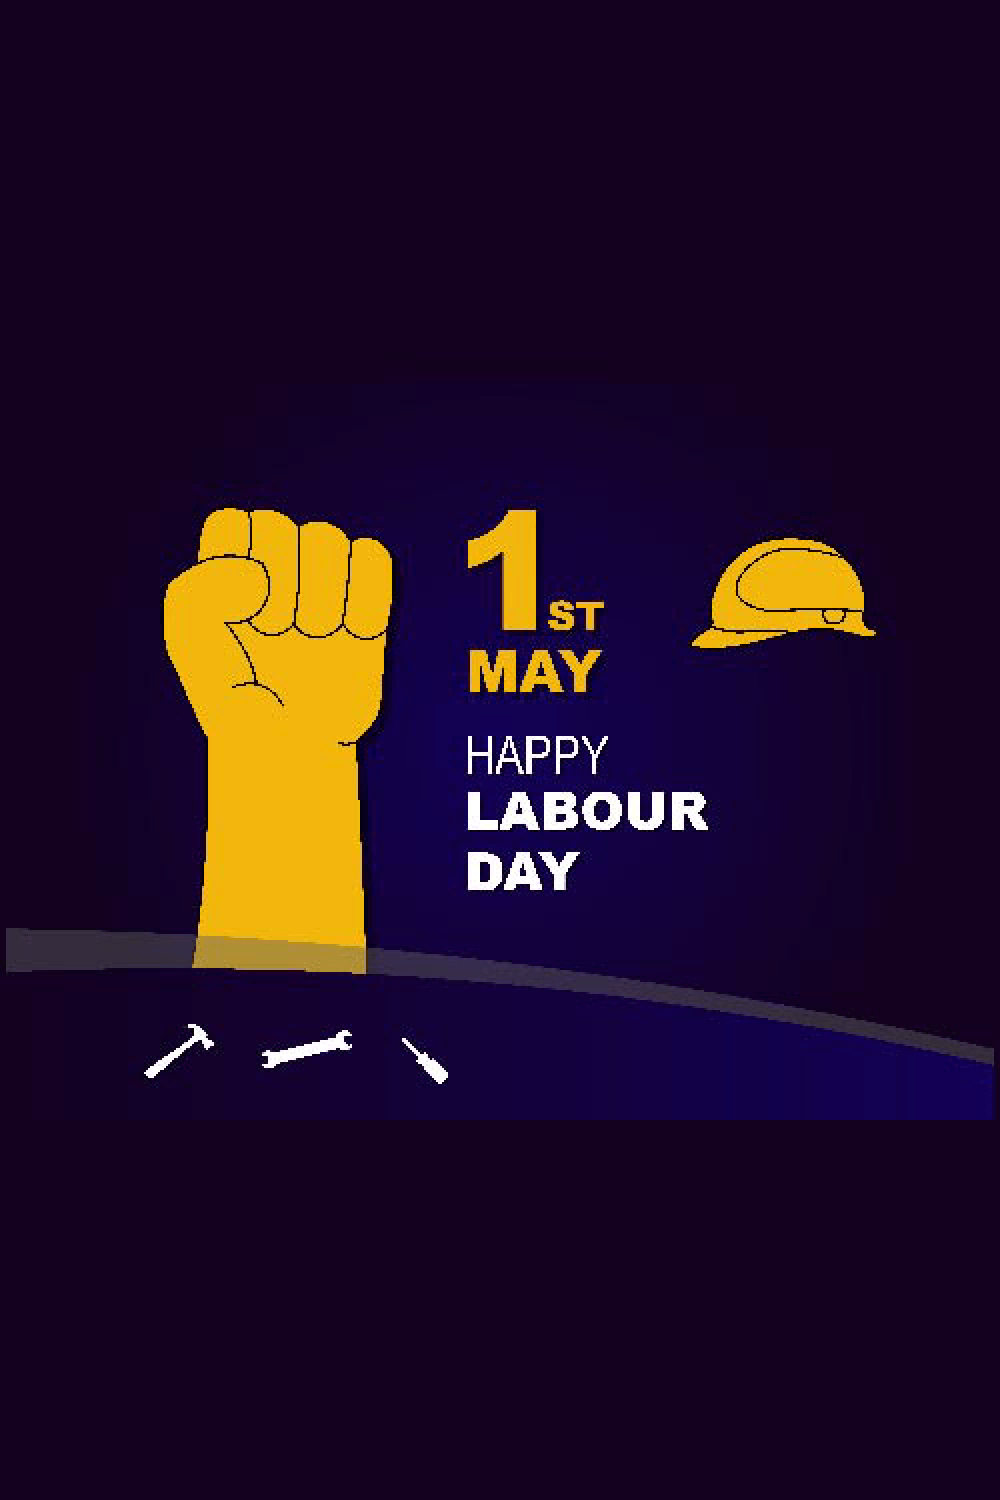 Happy International Labour day happy international workers day labor day and may day celebration design 1st May vector illustration 4000x3000px pinterest preview image.